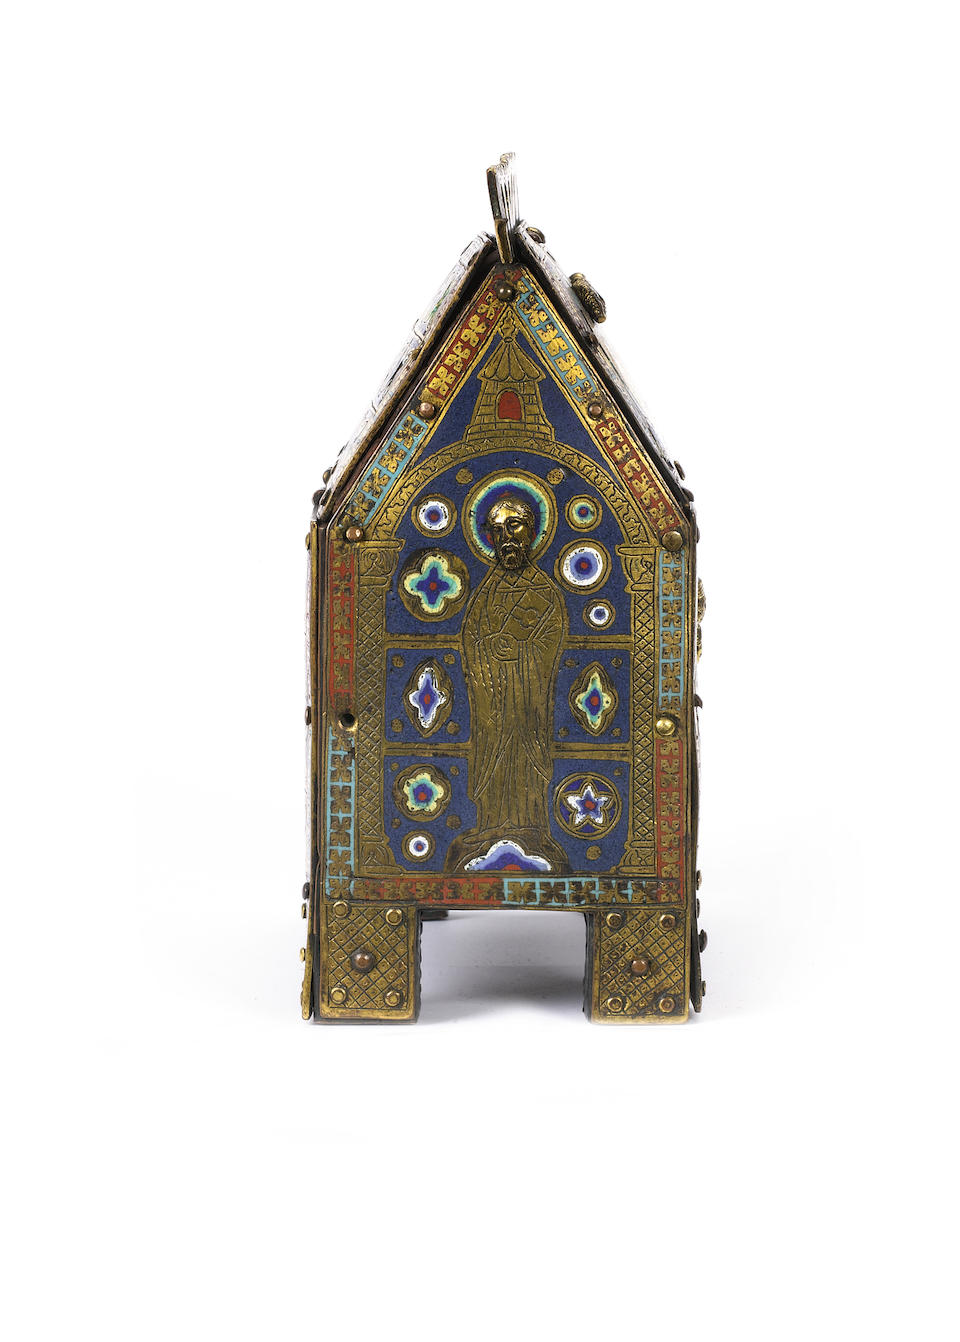 A French 13th century style enamel and gilt copper ch&#226;sse-reliquaire probably 19th century, possibly with earlier elements